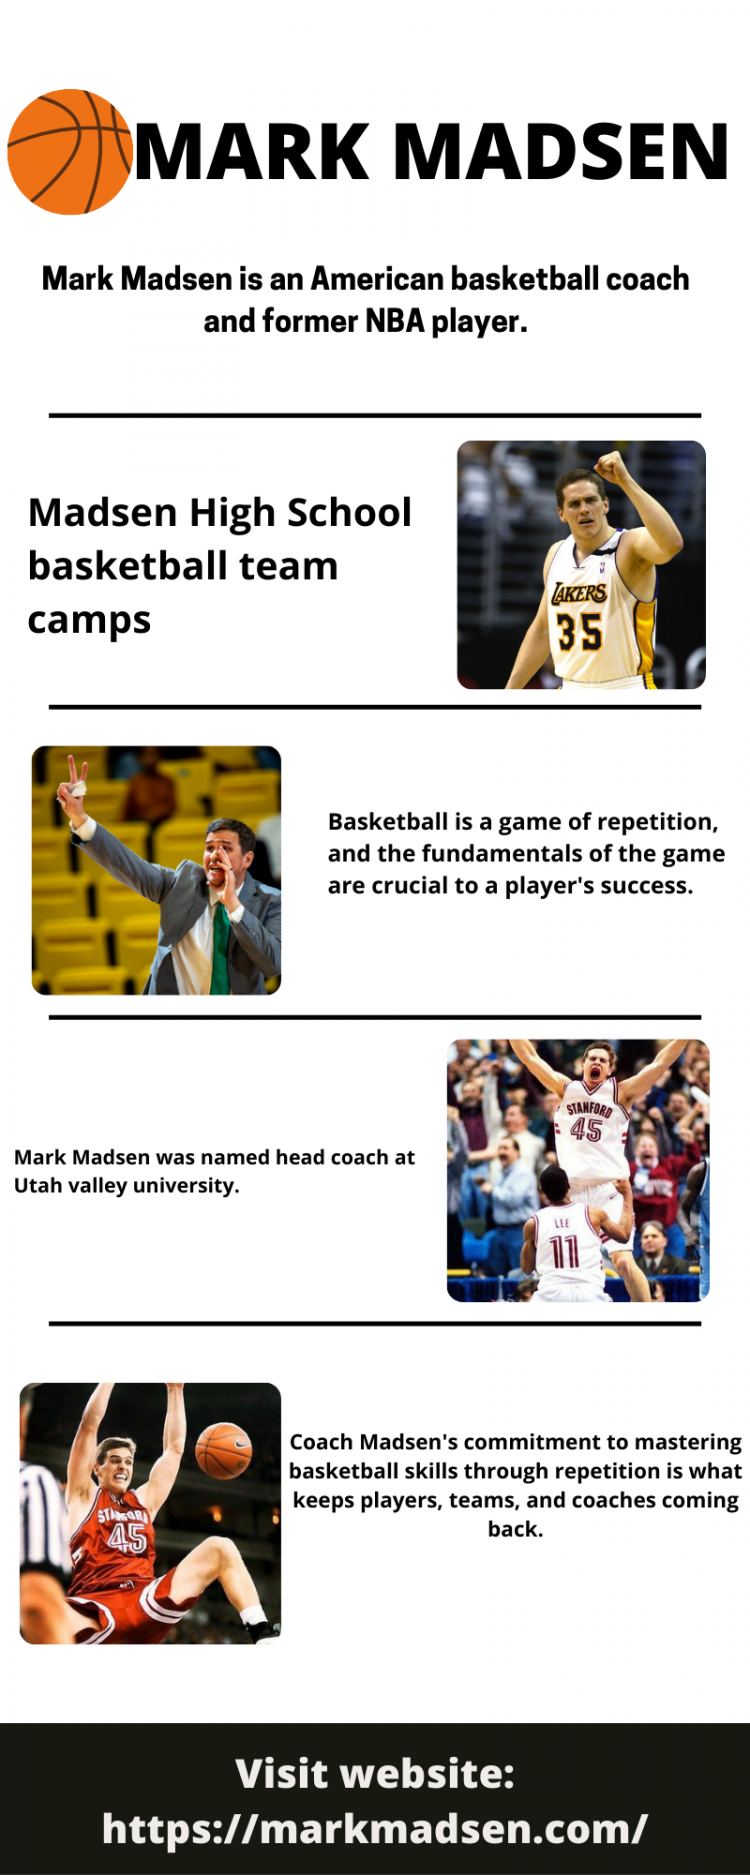 Mark Madsen is an American basketball coach and former NBA player who is the head coach of Utah Valley University of the Western Athletic Conference (WAC). For additional details visit us at the website: https://markmadsen.com